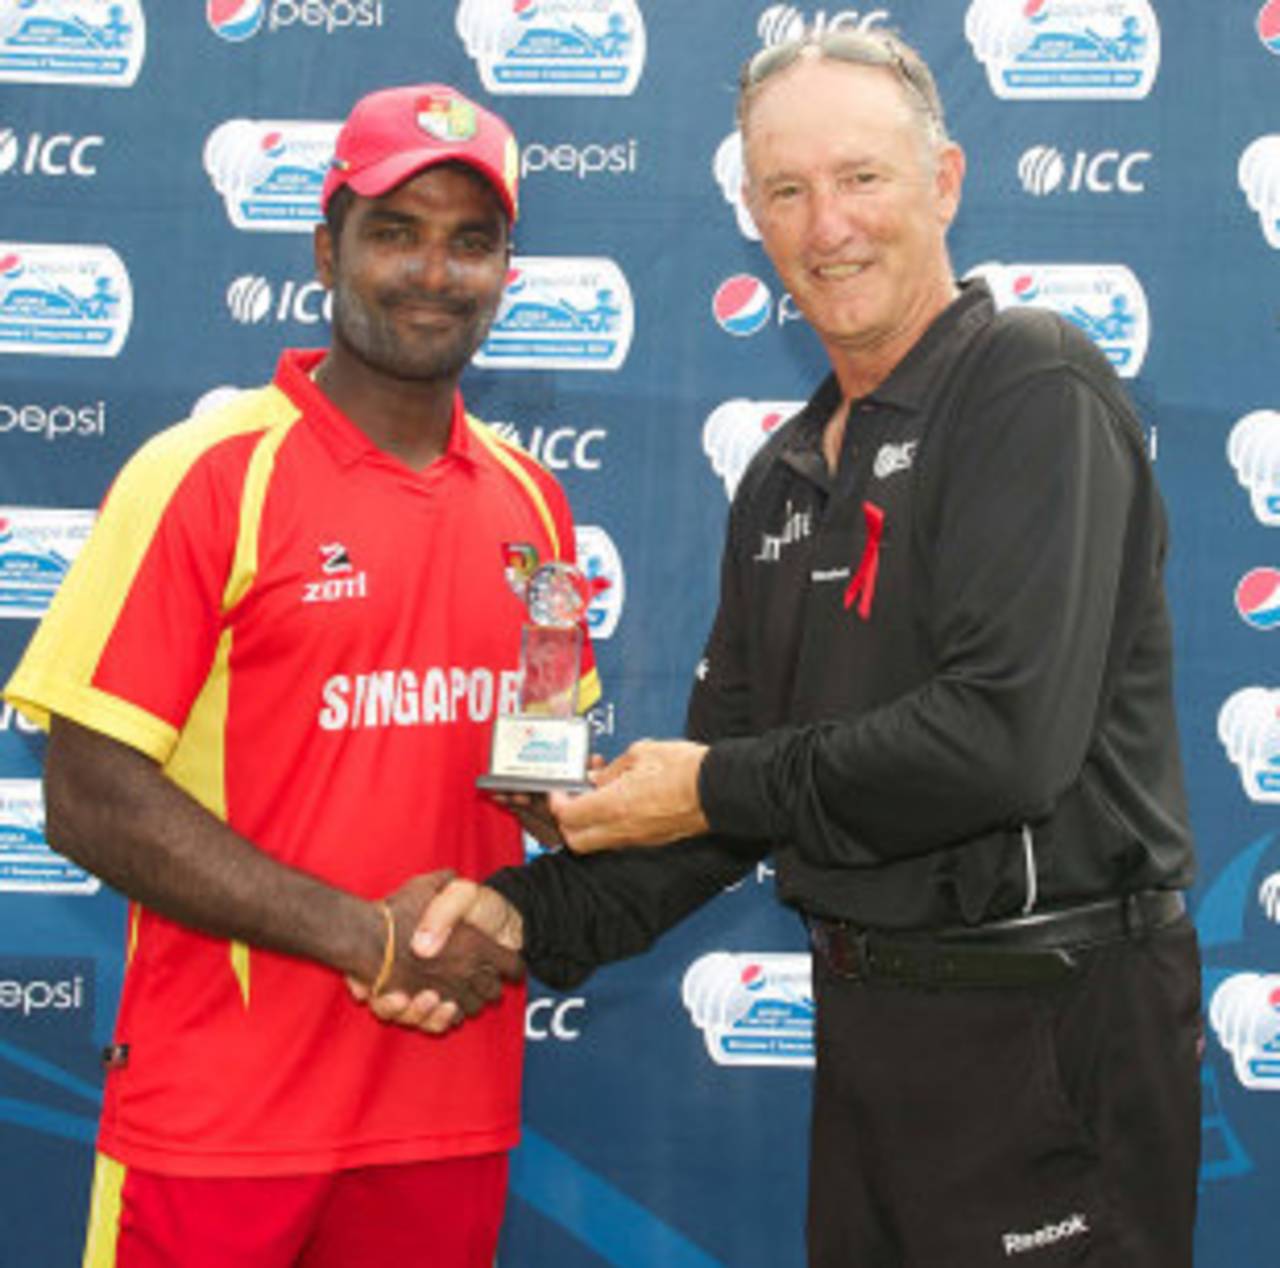 Chaminda Ruwan receives the Player of the match award from Tony Hill, Singapore v Malaysia, ICC World Cricket League Division Five final, Singapore, February 25, 2012